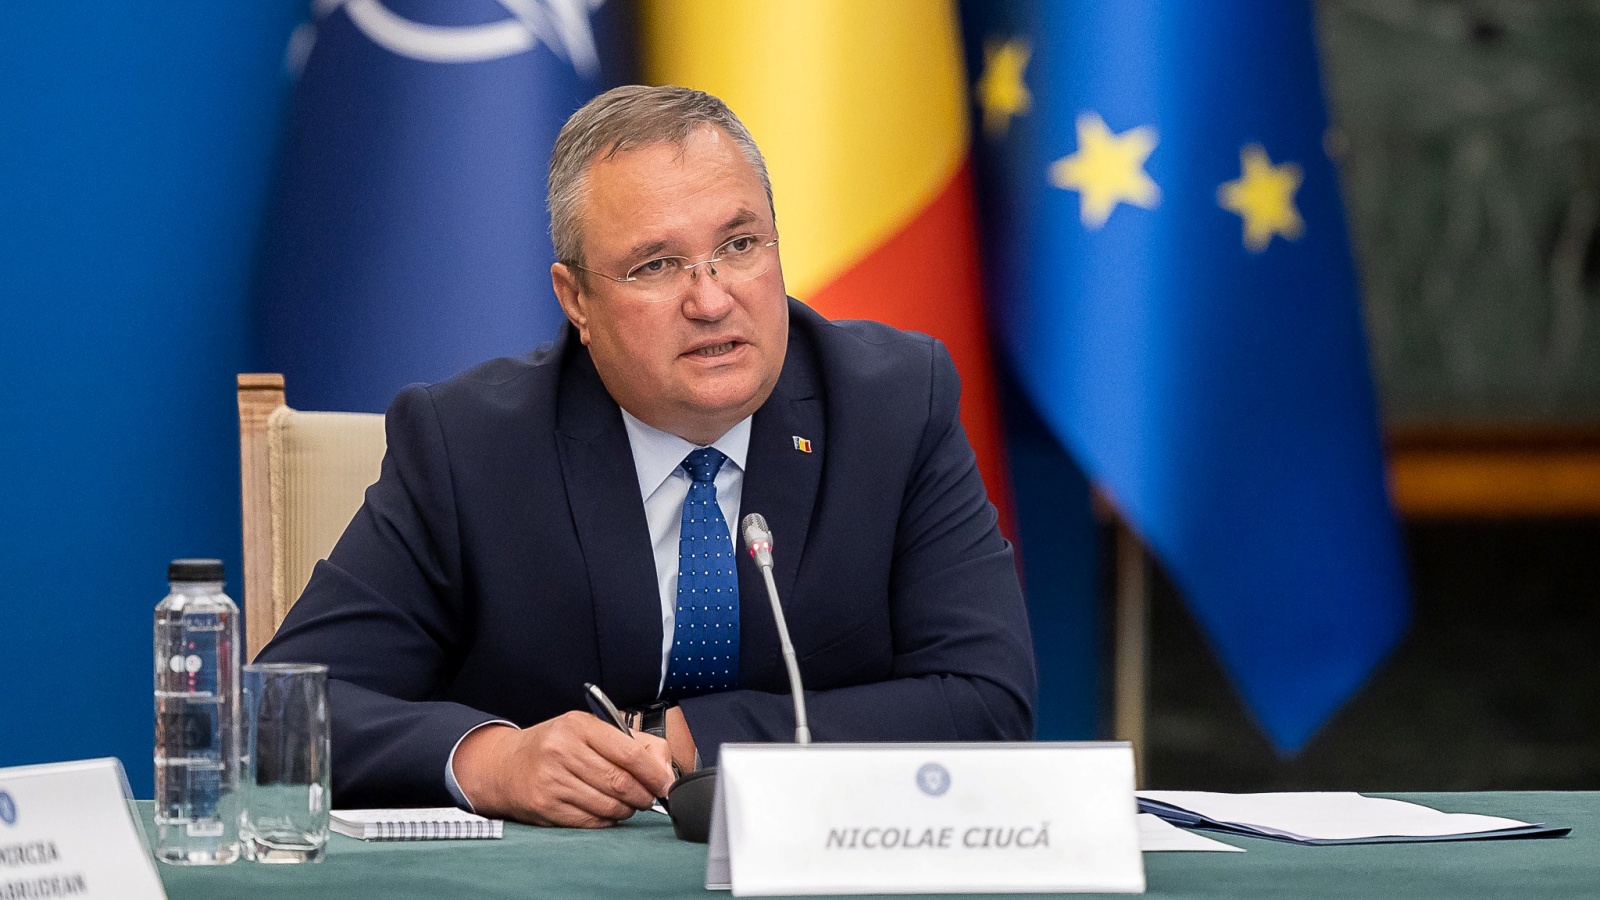 The Romanian Government wants to Simplify the Procedures for Making Investments